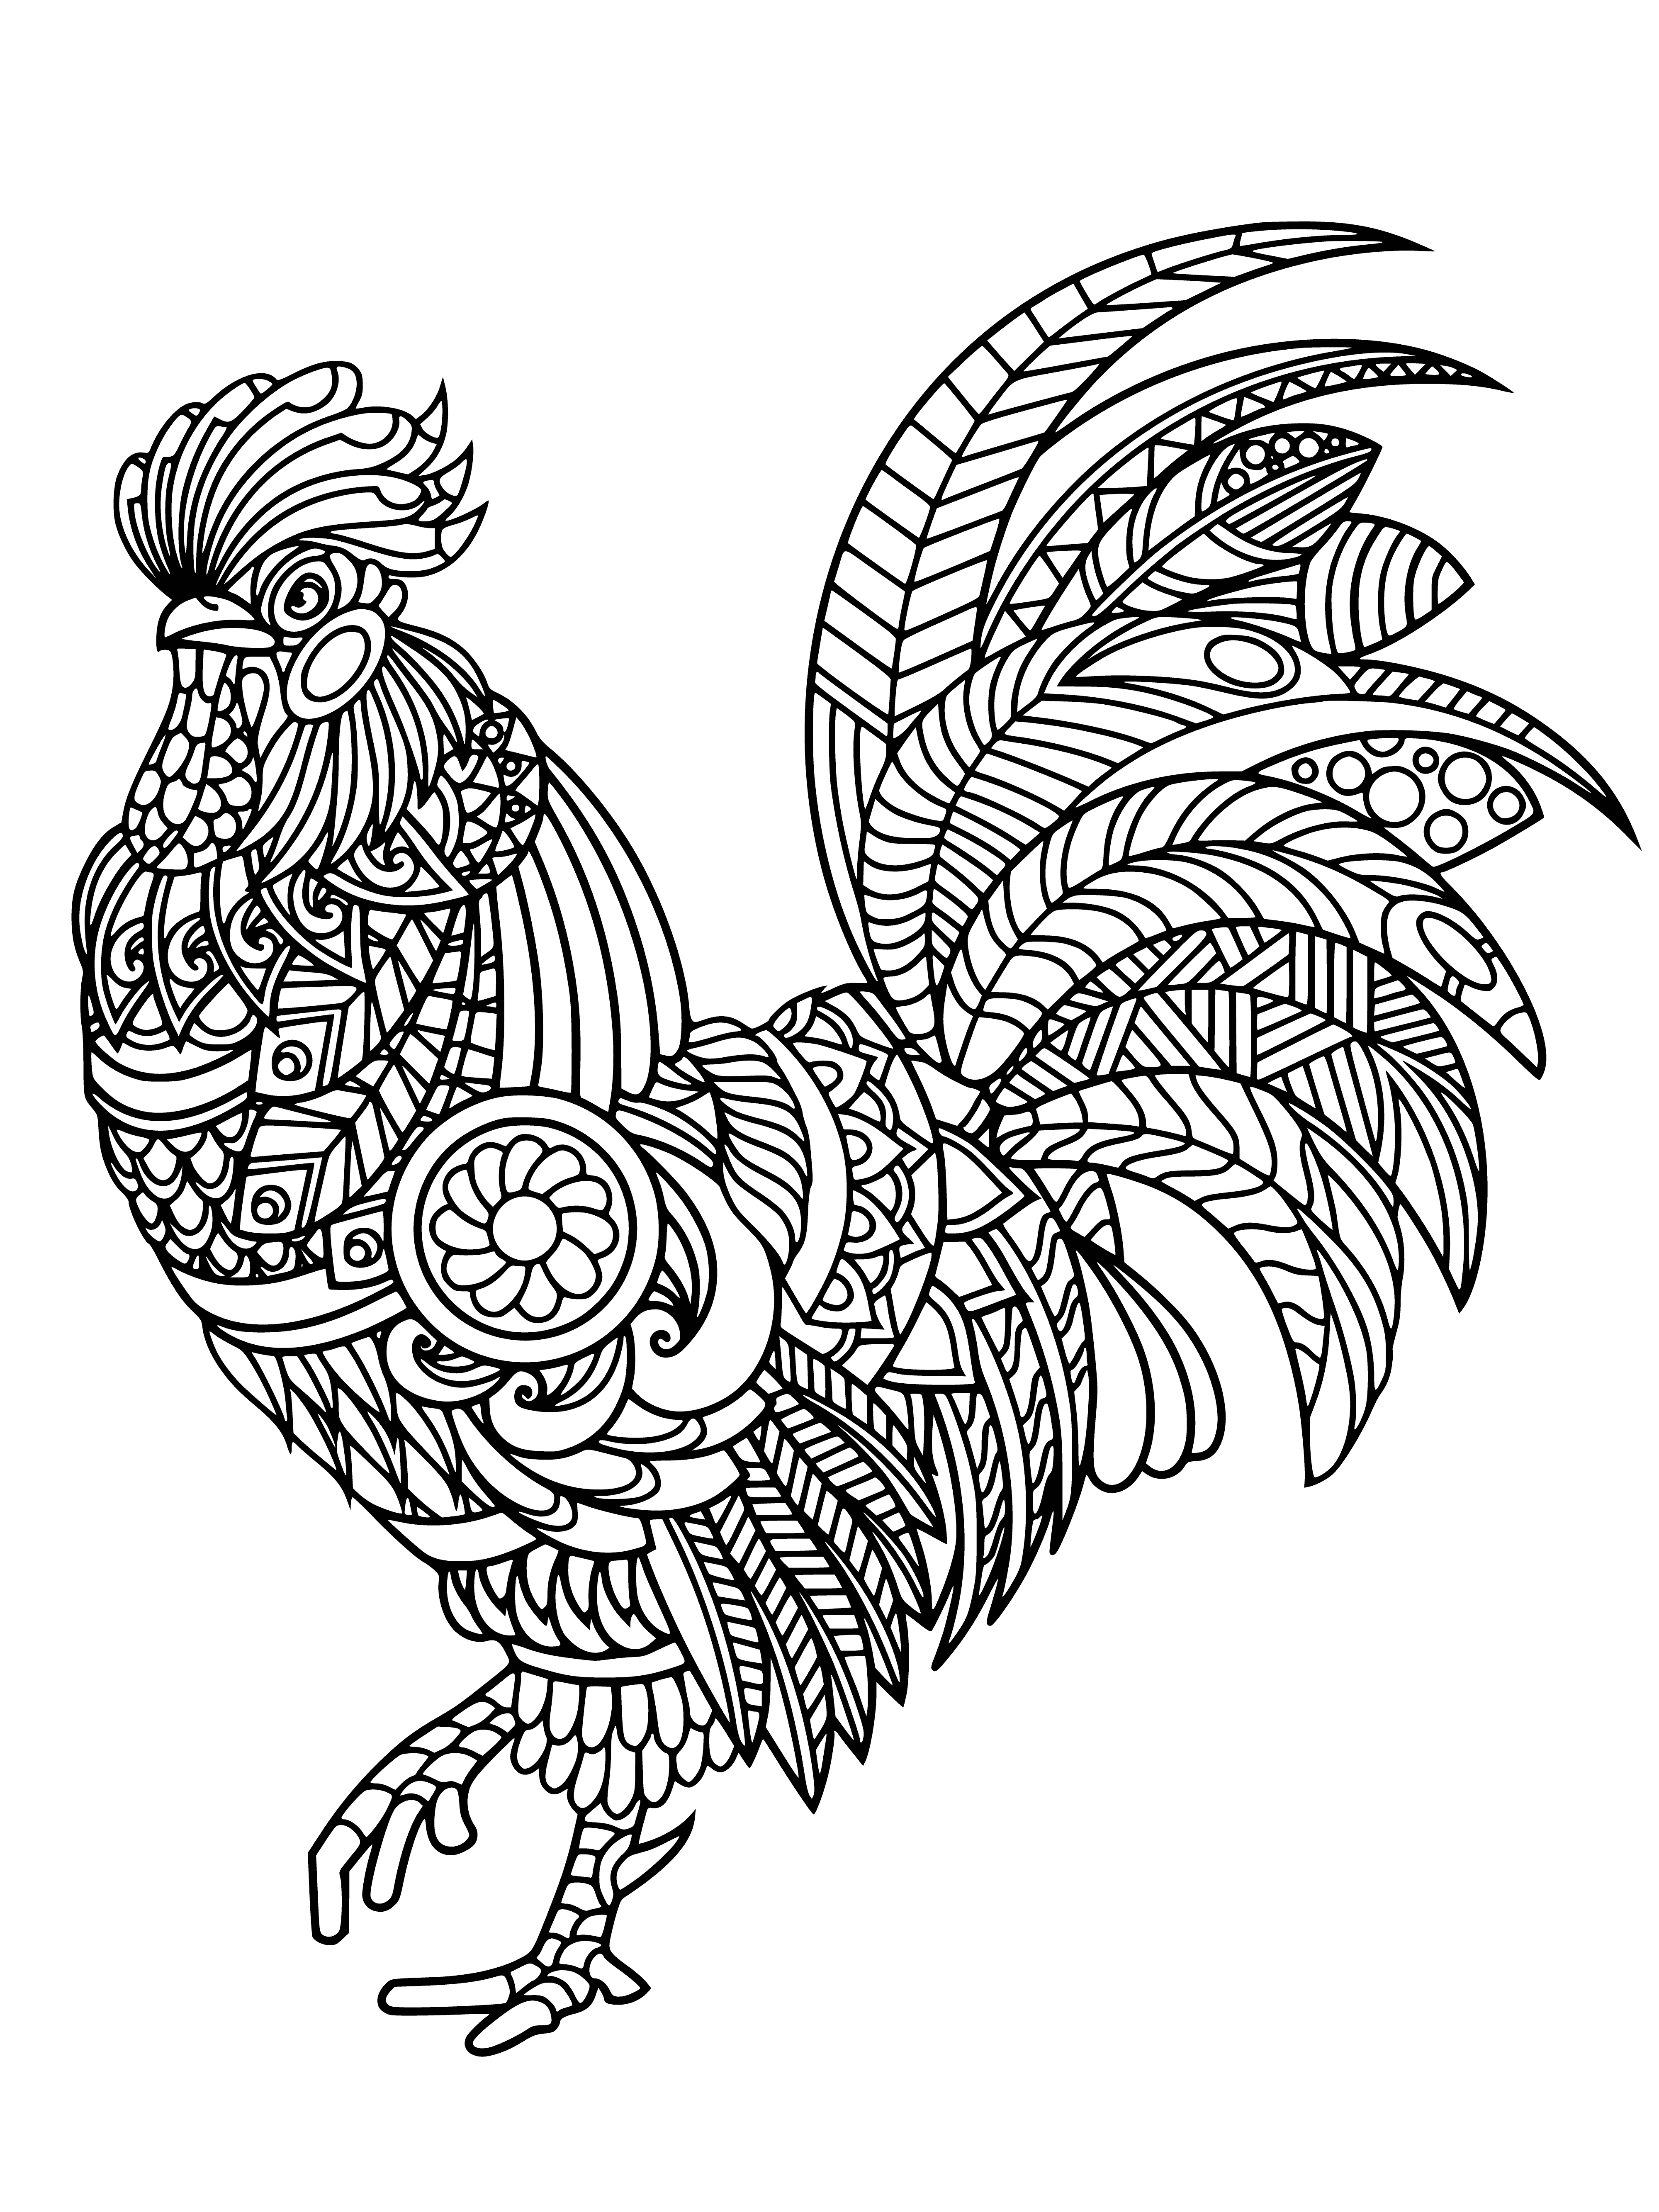 Rooster coloring page